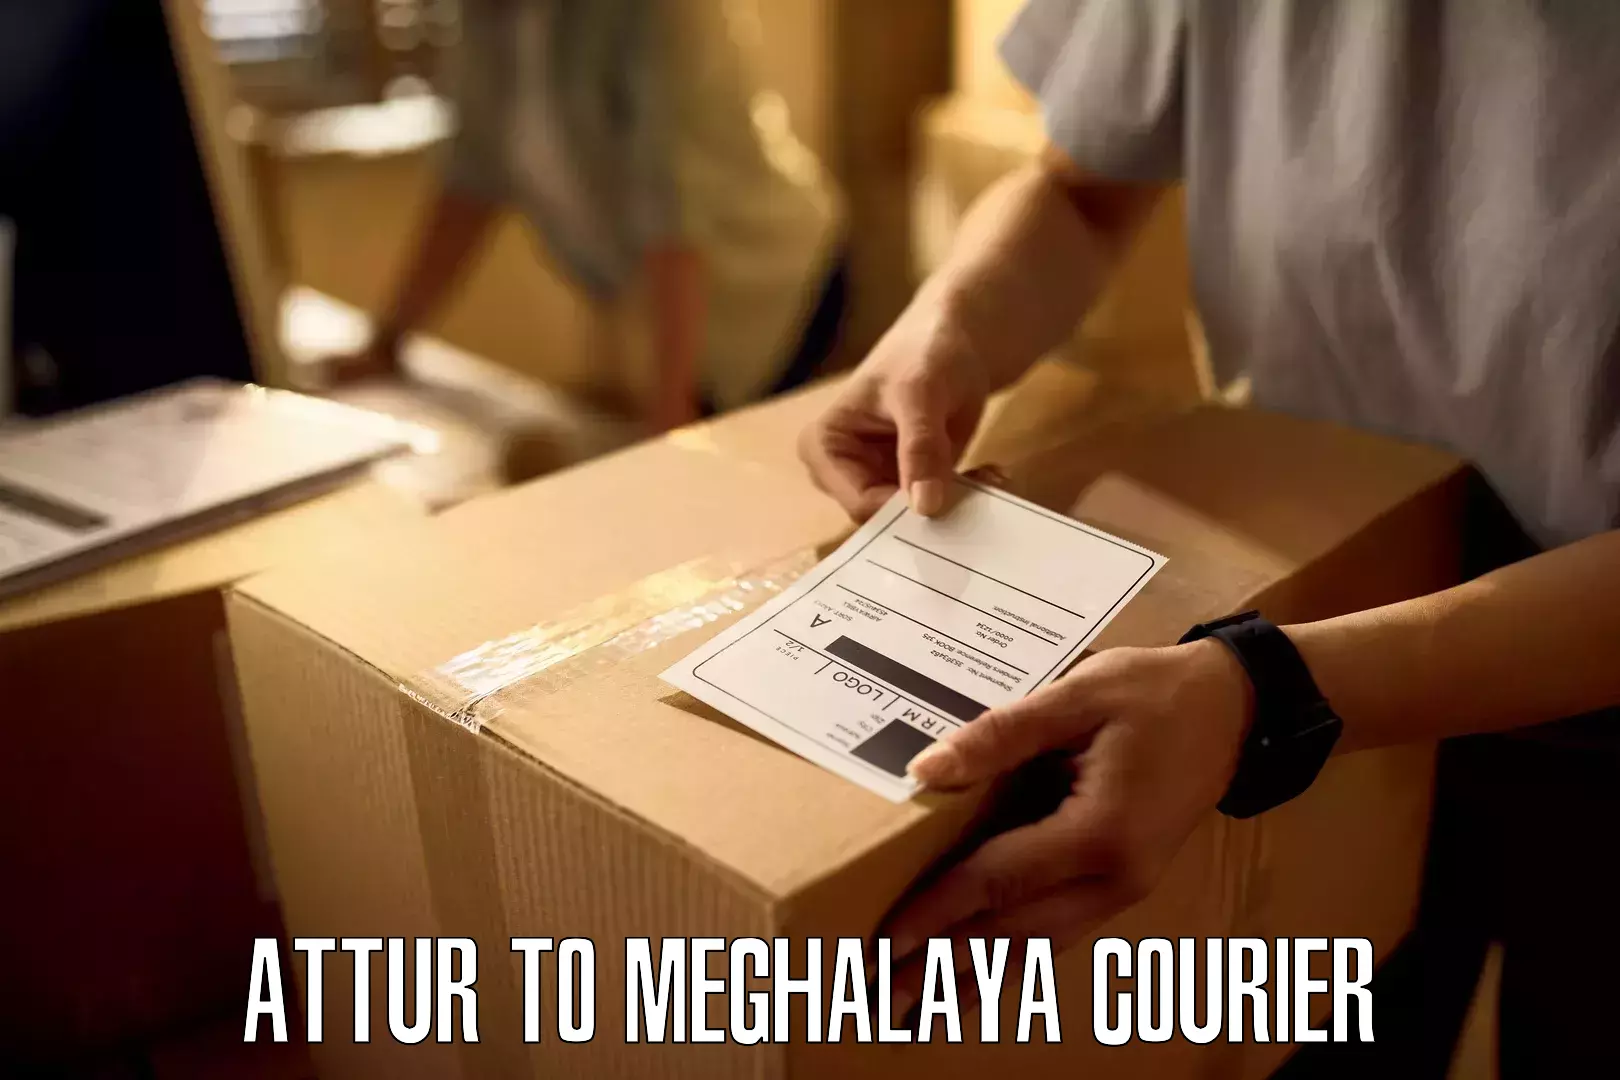 On-call courier service Attur to Meghalaya